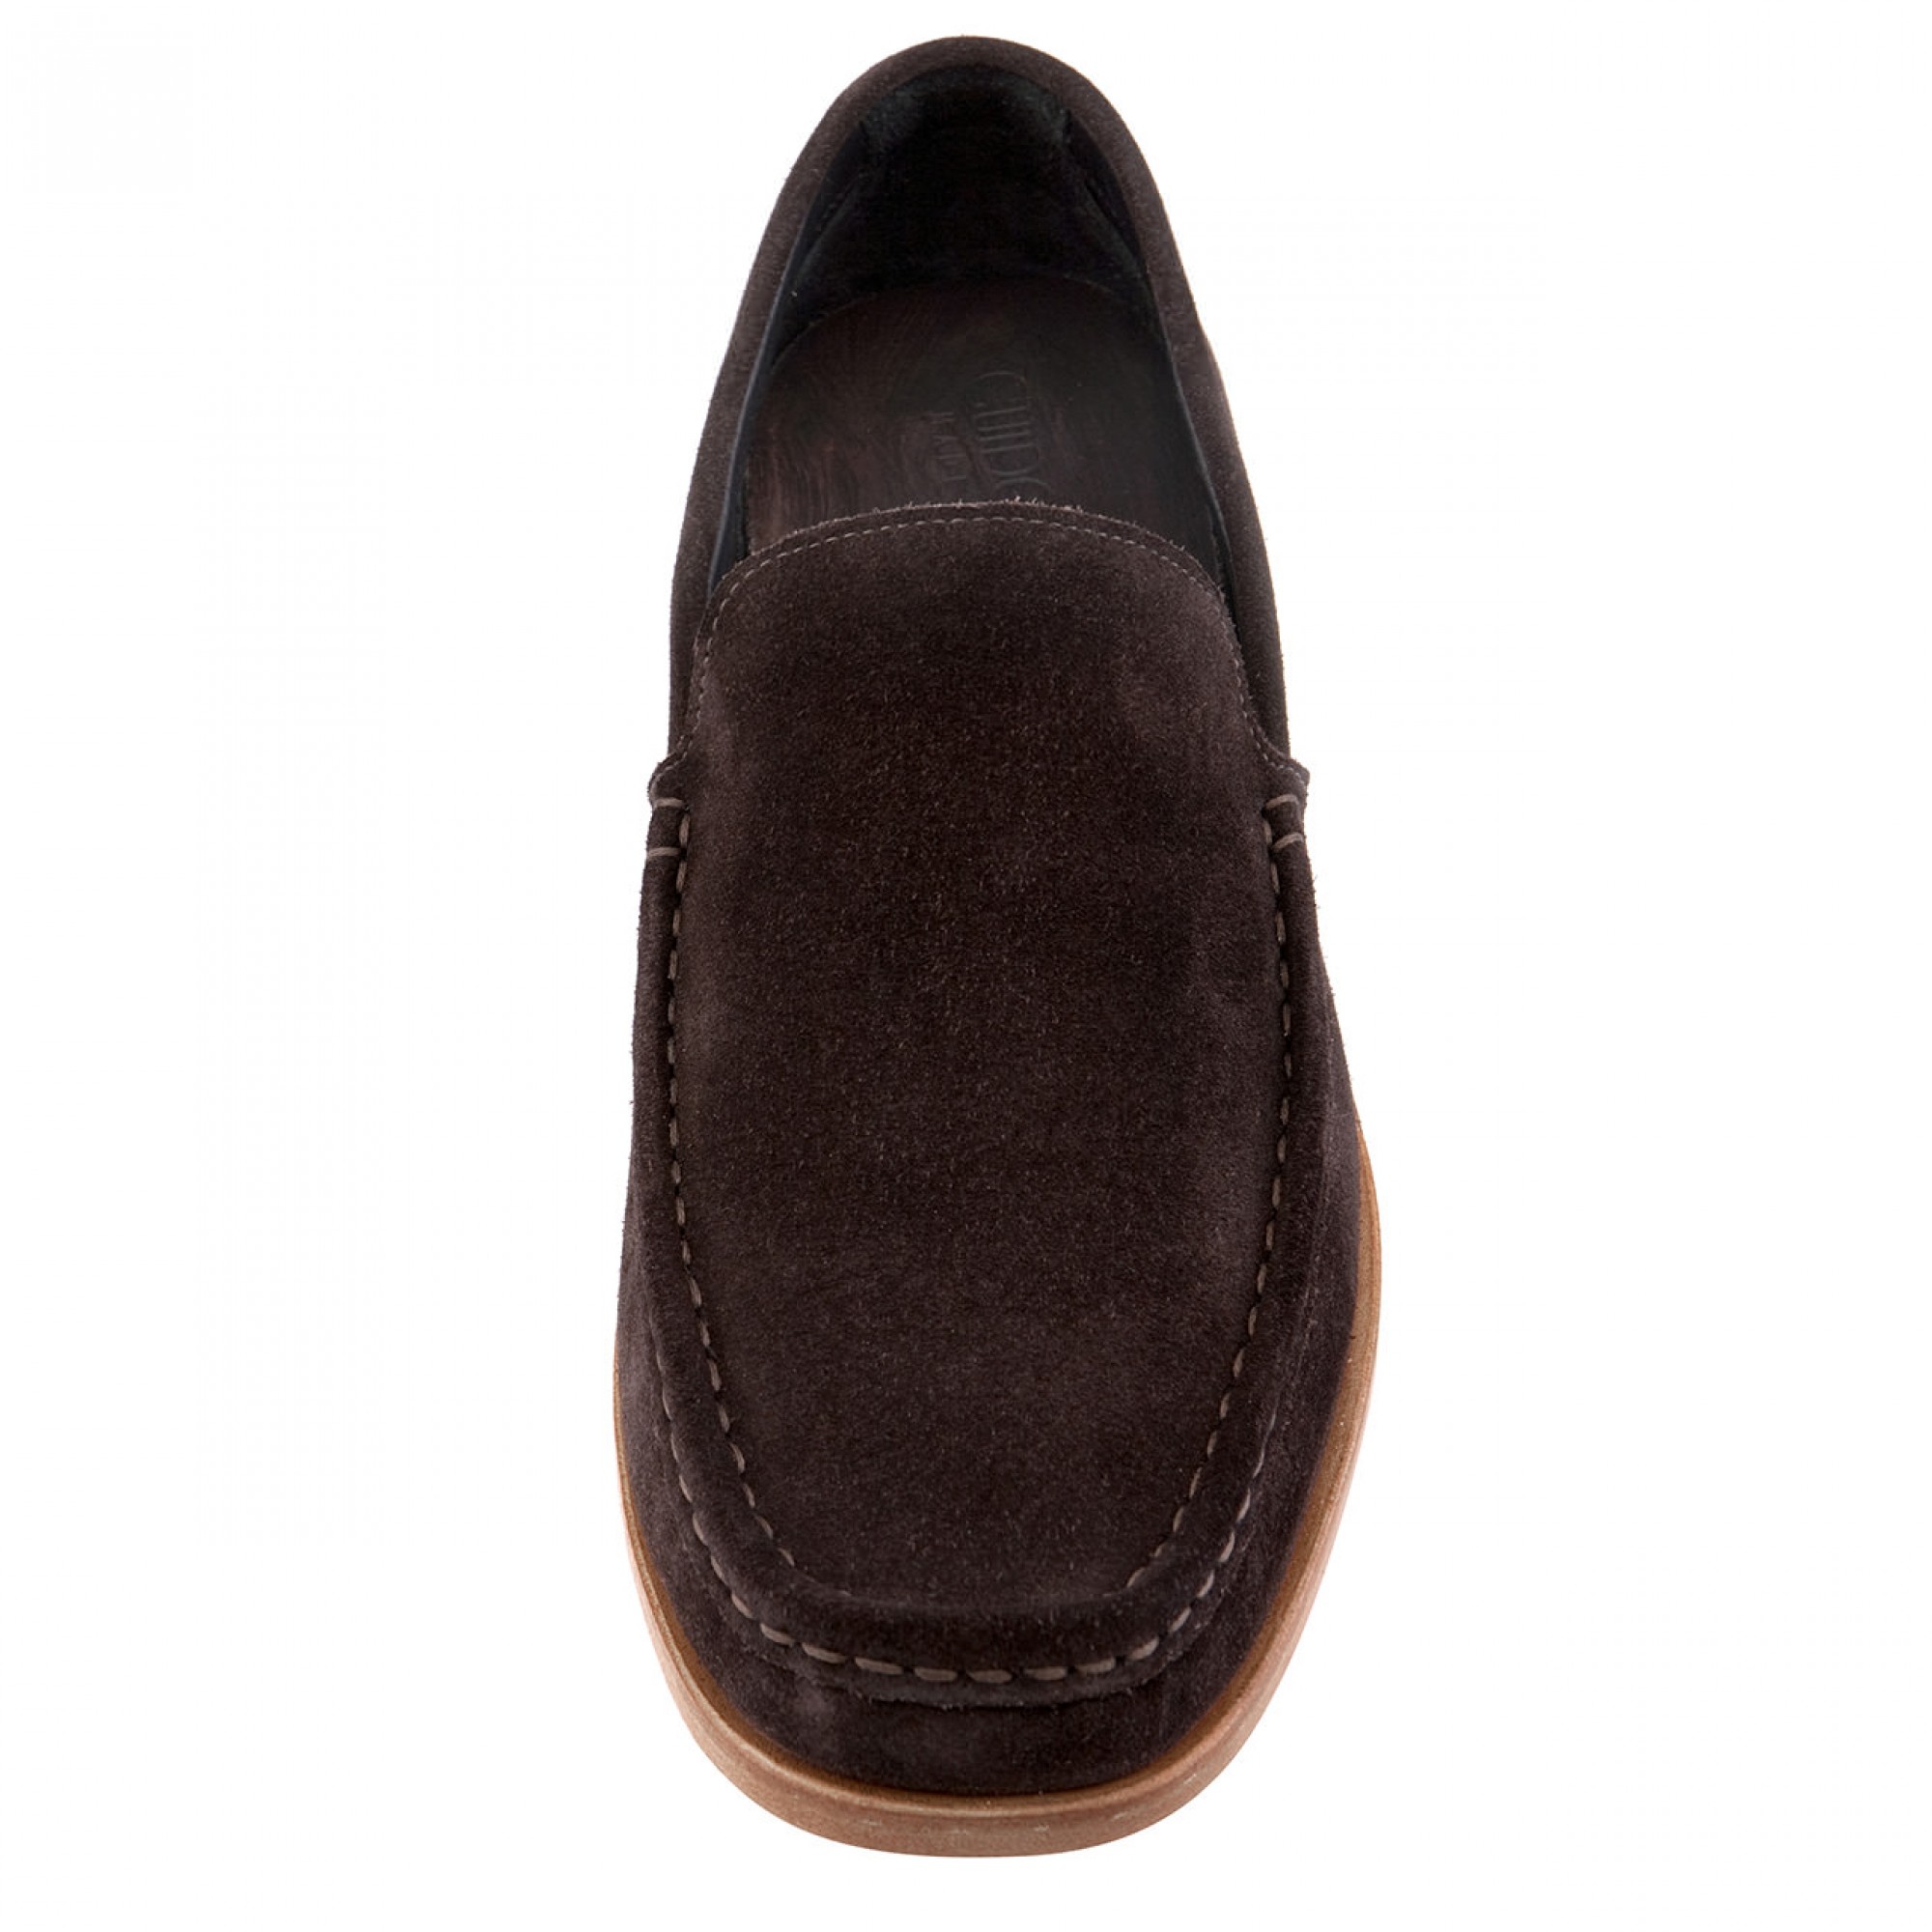 São Paulo - Elevator Loafers in Suede Leather up to 2.6 inches